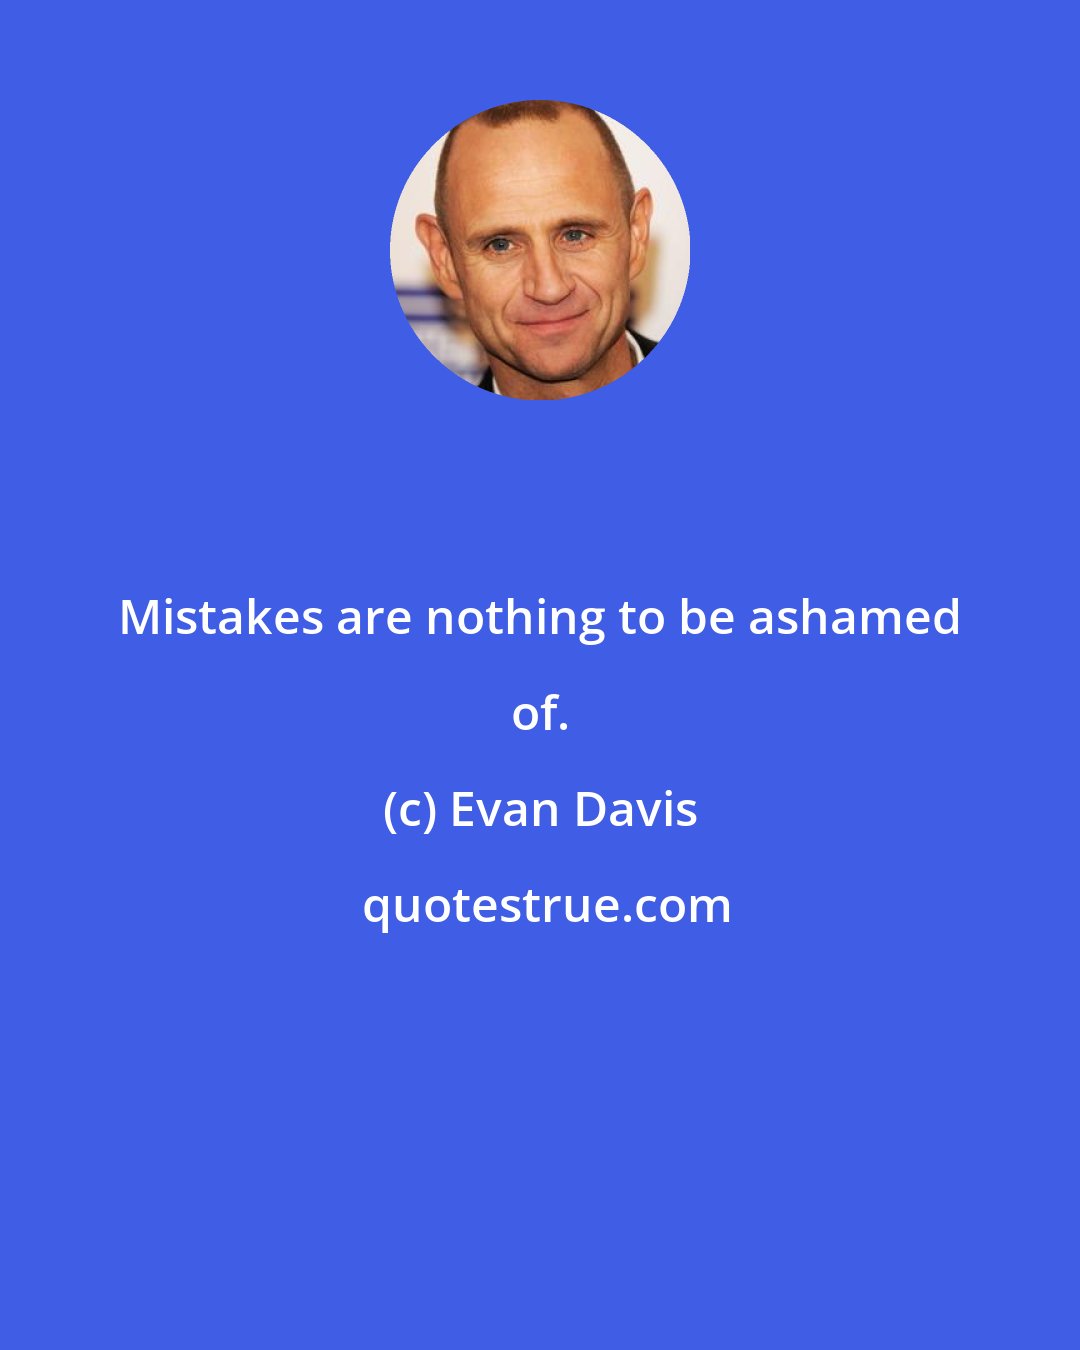 Evan Davis: Mistakes are nothing to be ashamed of.